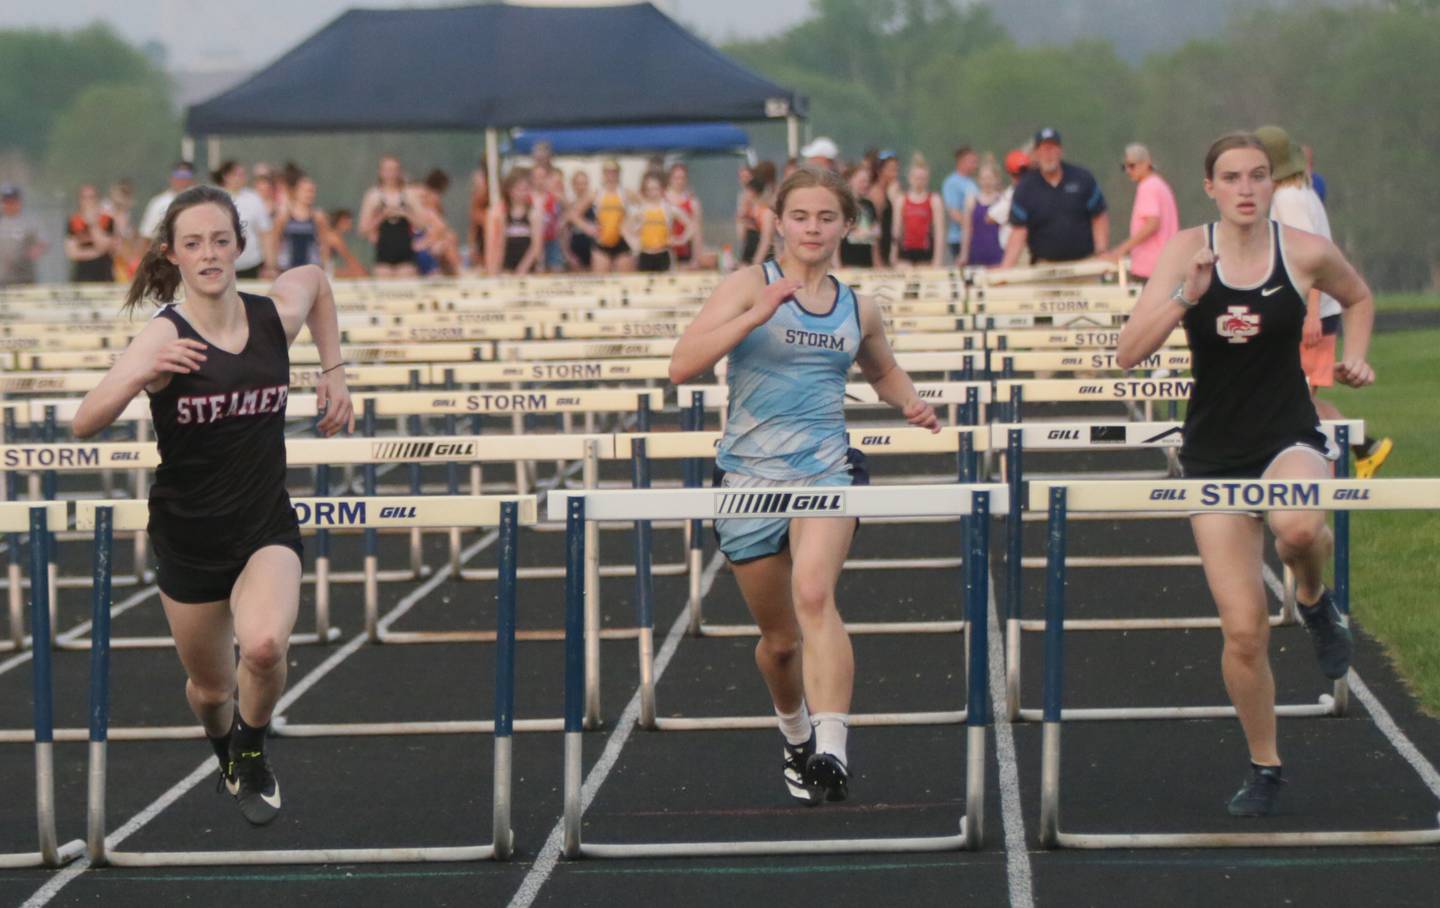 Fulton's Lara Bielema, Bureau Valley's Ashley Nordstrom and Indian Creek's Cheyenne Fay race in the 100-meter hurdles during the Class 1A Bureau Valley Sectional held Wednesday, May 11, 2022, at Bureau Valley High School in Manlius.